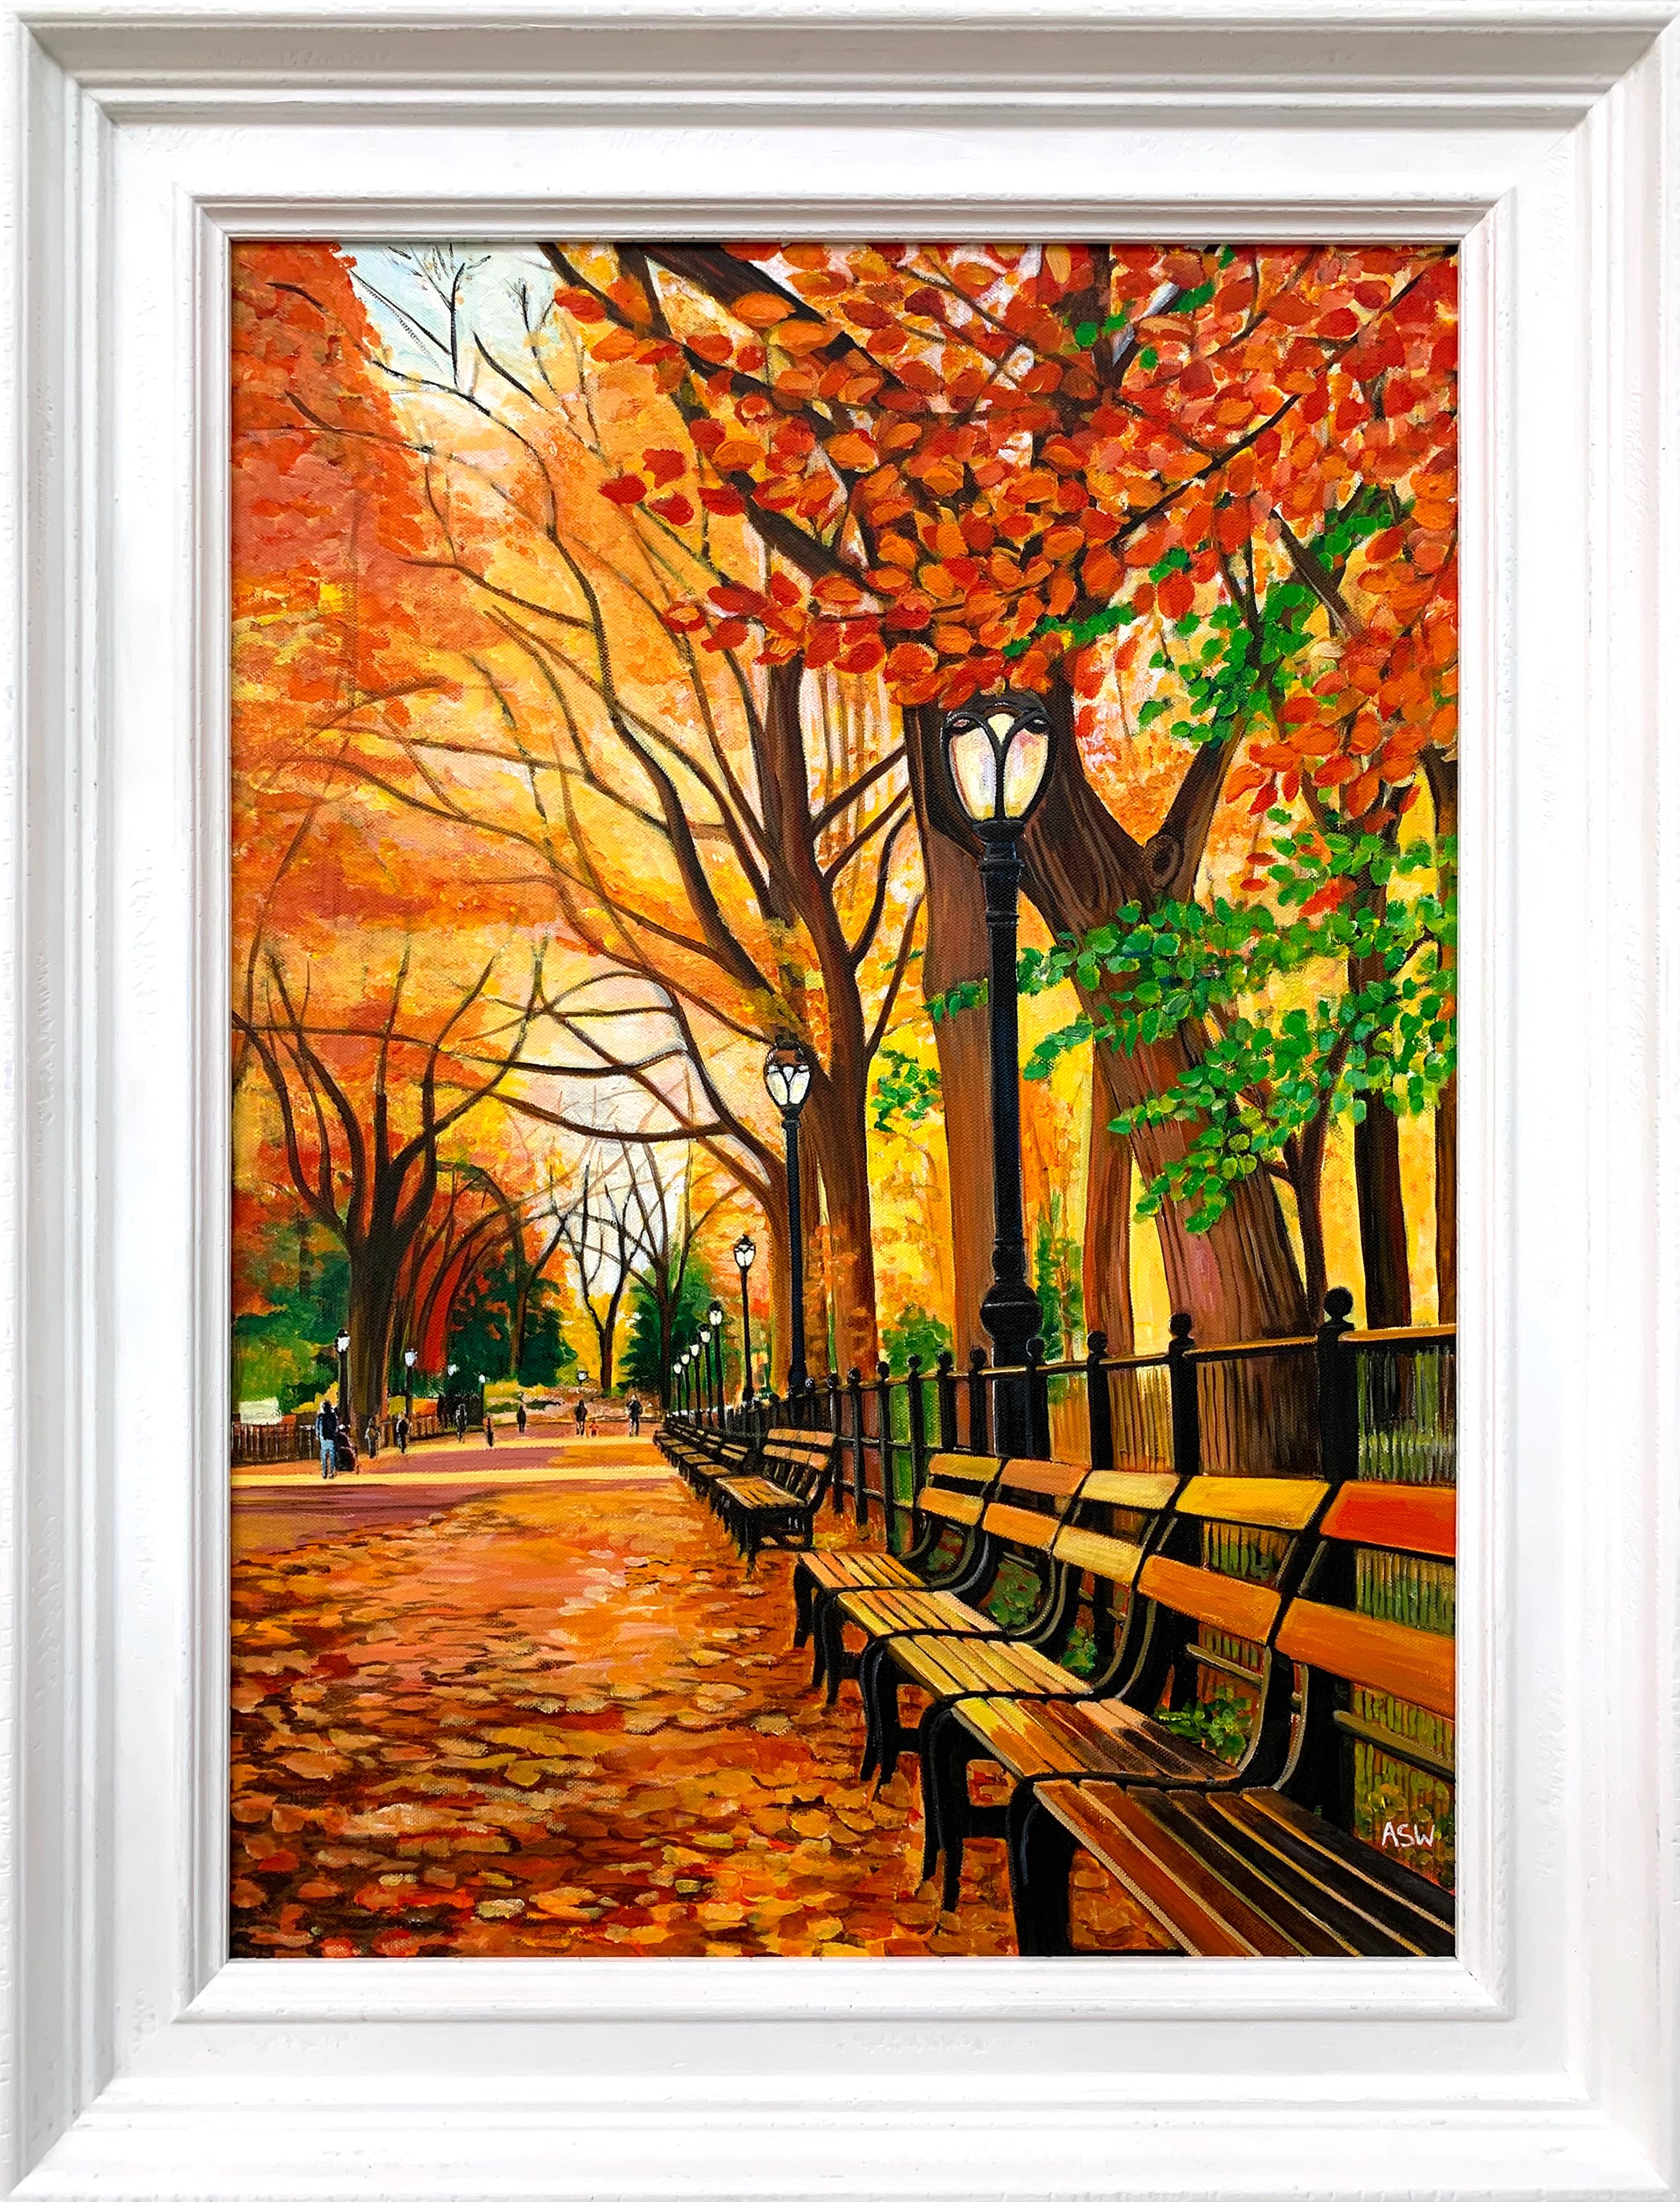 Angela Wakefield Landscape Painting - Painting of Central Park New York in Autumn Fall by Collectible British Artist